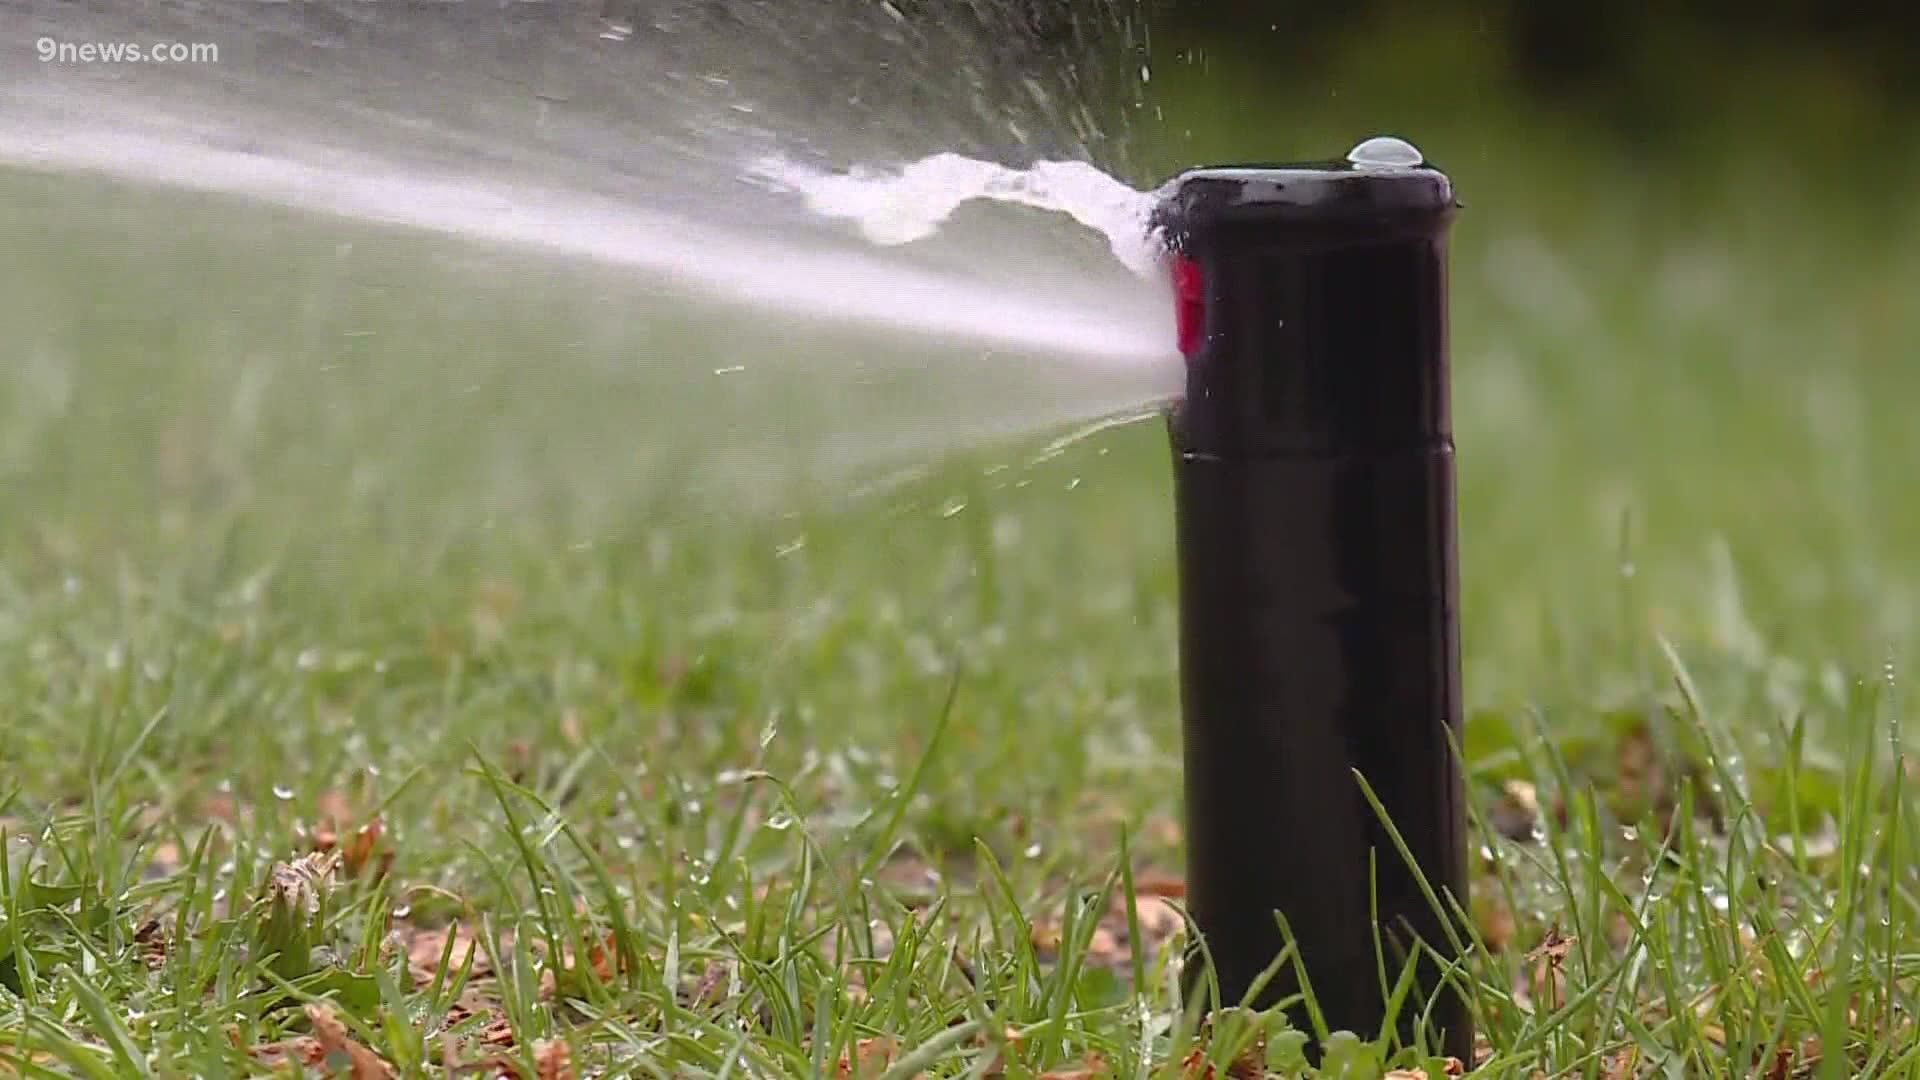 Tips on how to winterize your sprinkler system | 9news.com How To Turn Sprinklers Back On After Winter